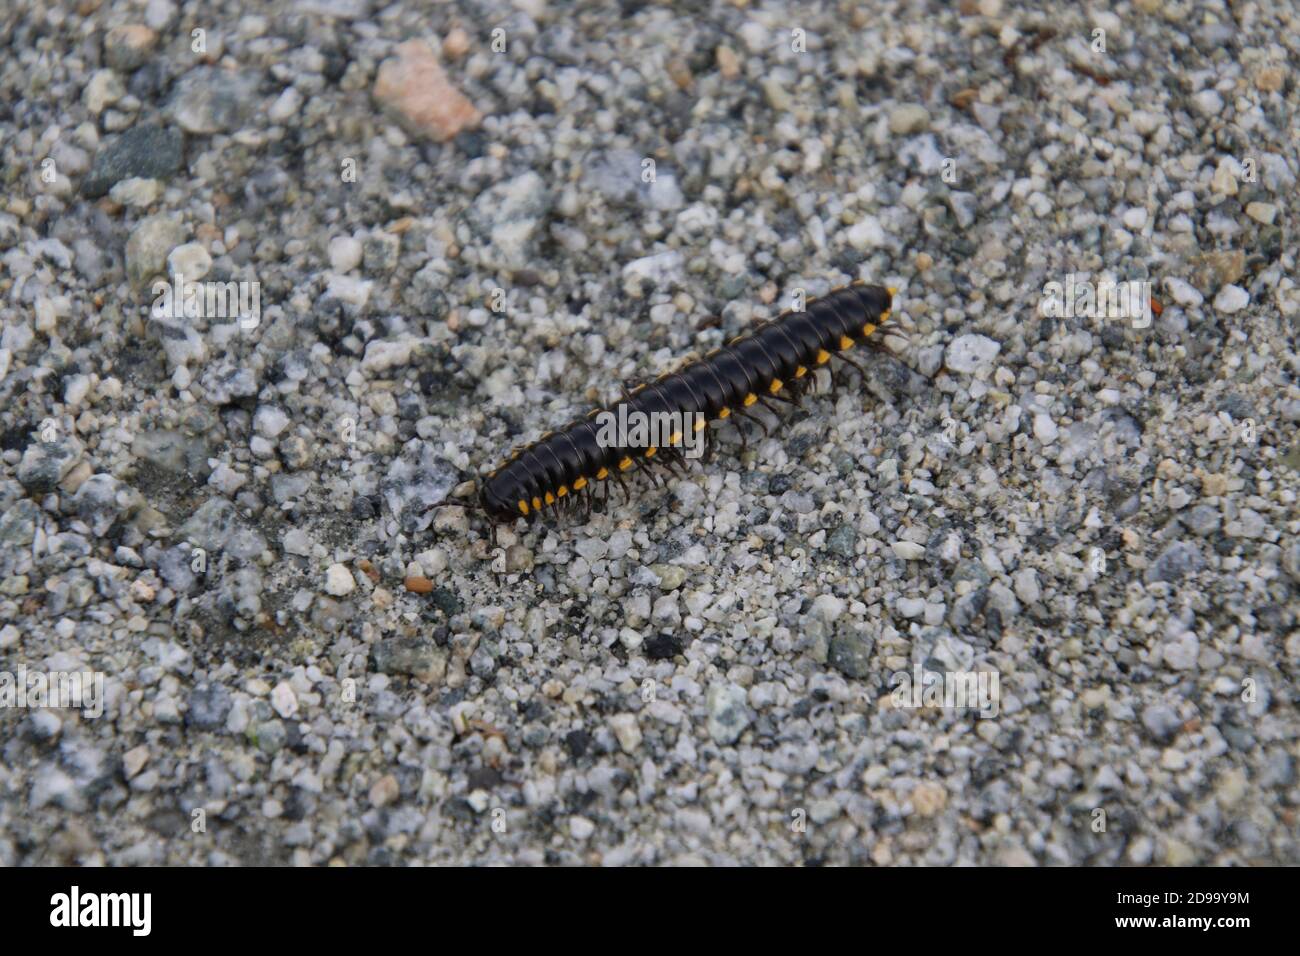 A black and yellow millipede crawling on a fine gravel path on a sunny day Stock Photo